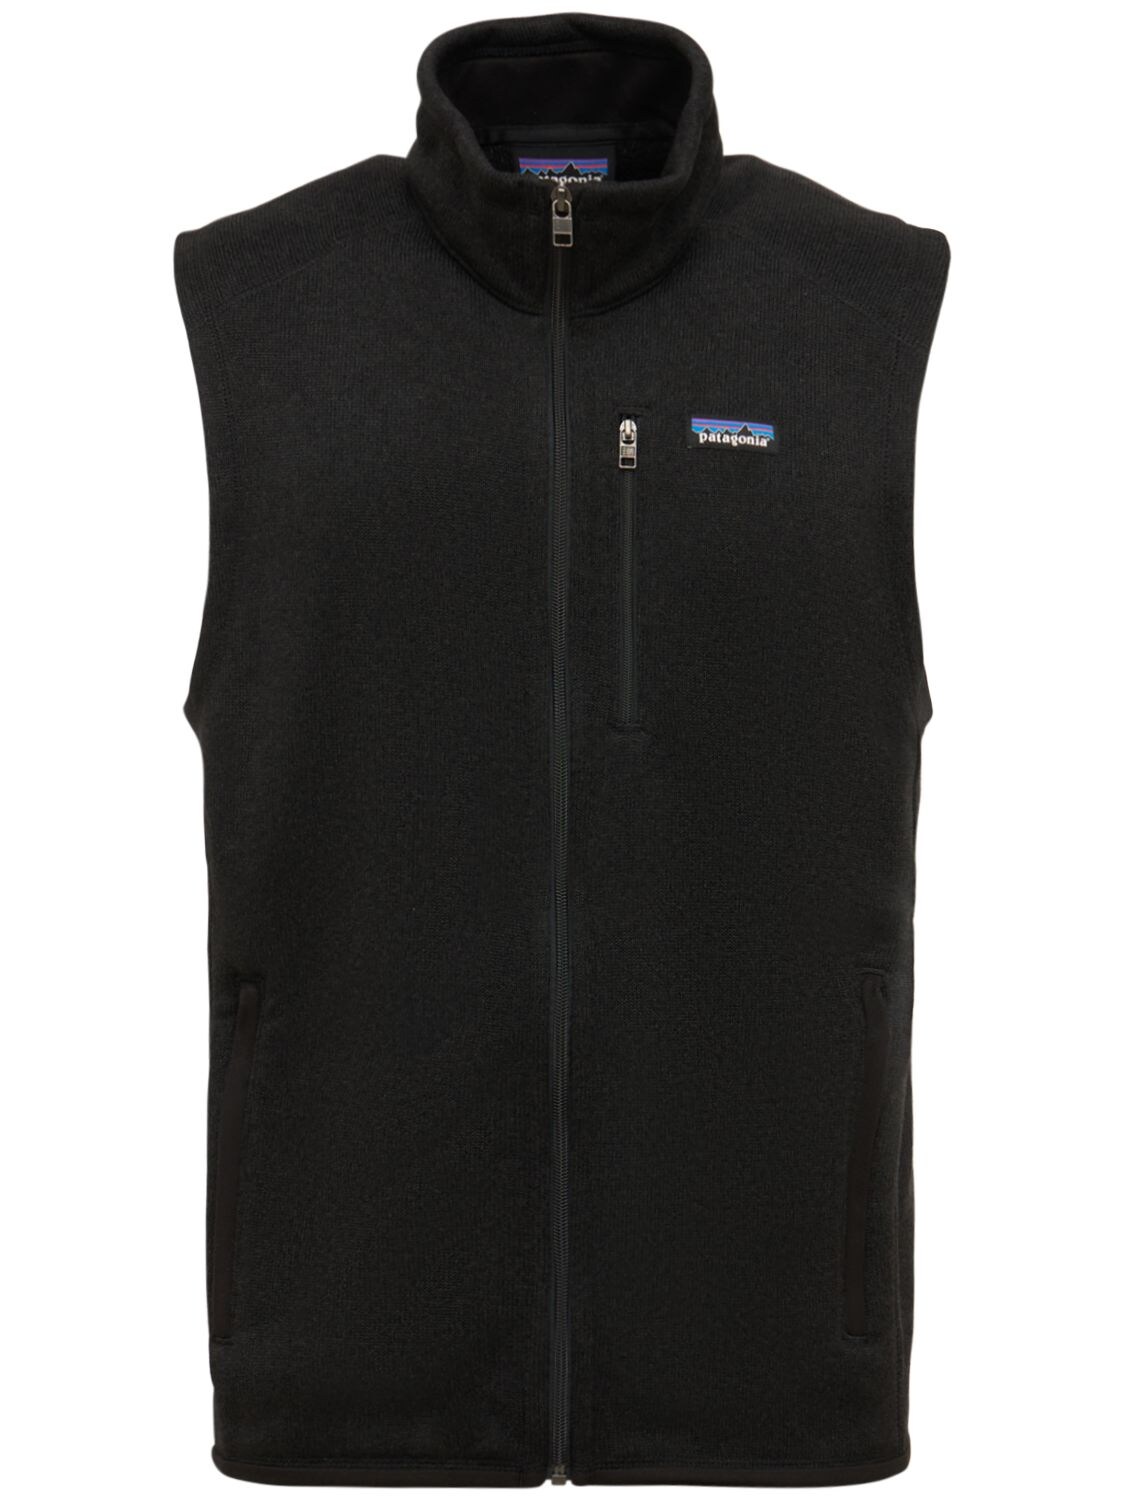 PATAGONIA M'S BETTER jumper RECYCLED TECH waistcoat